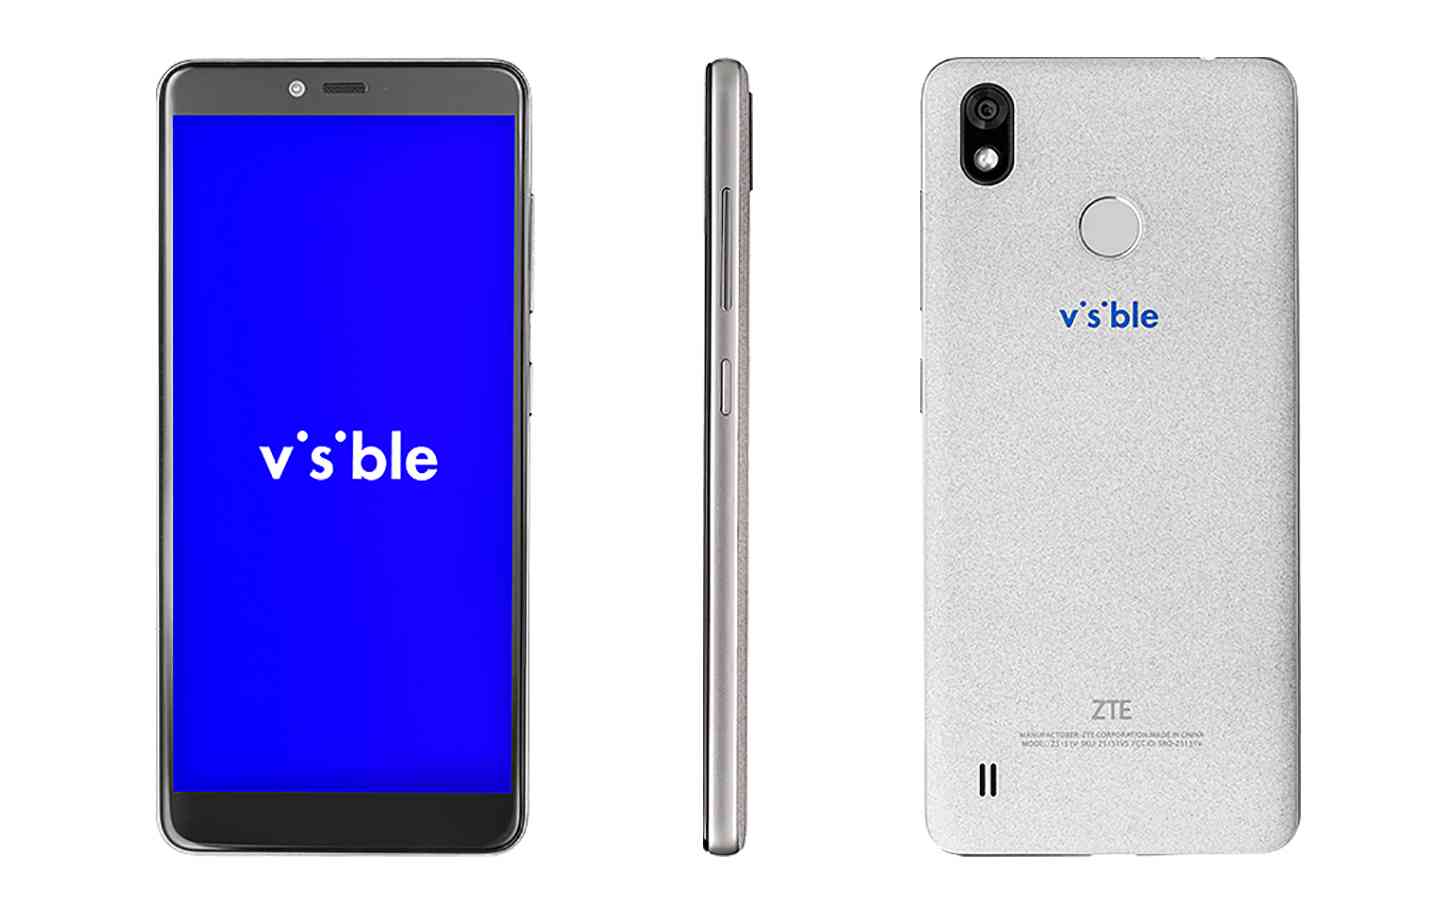 Visible launches Swap program that'll get you a free Android phone